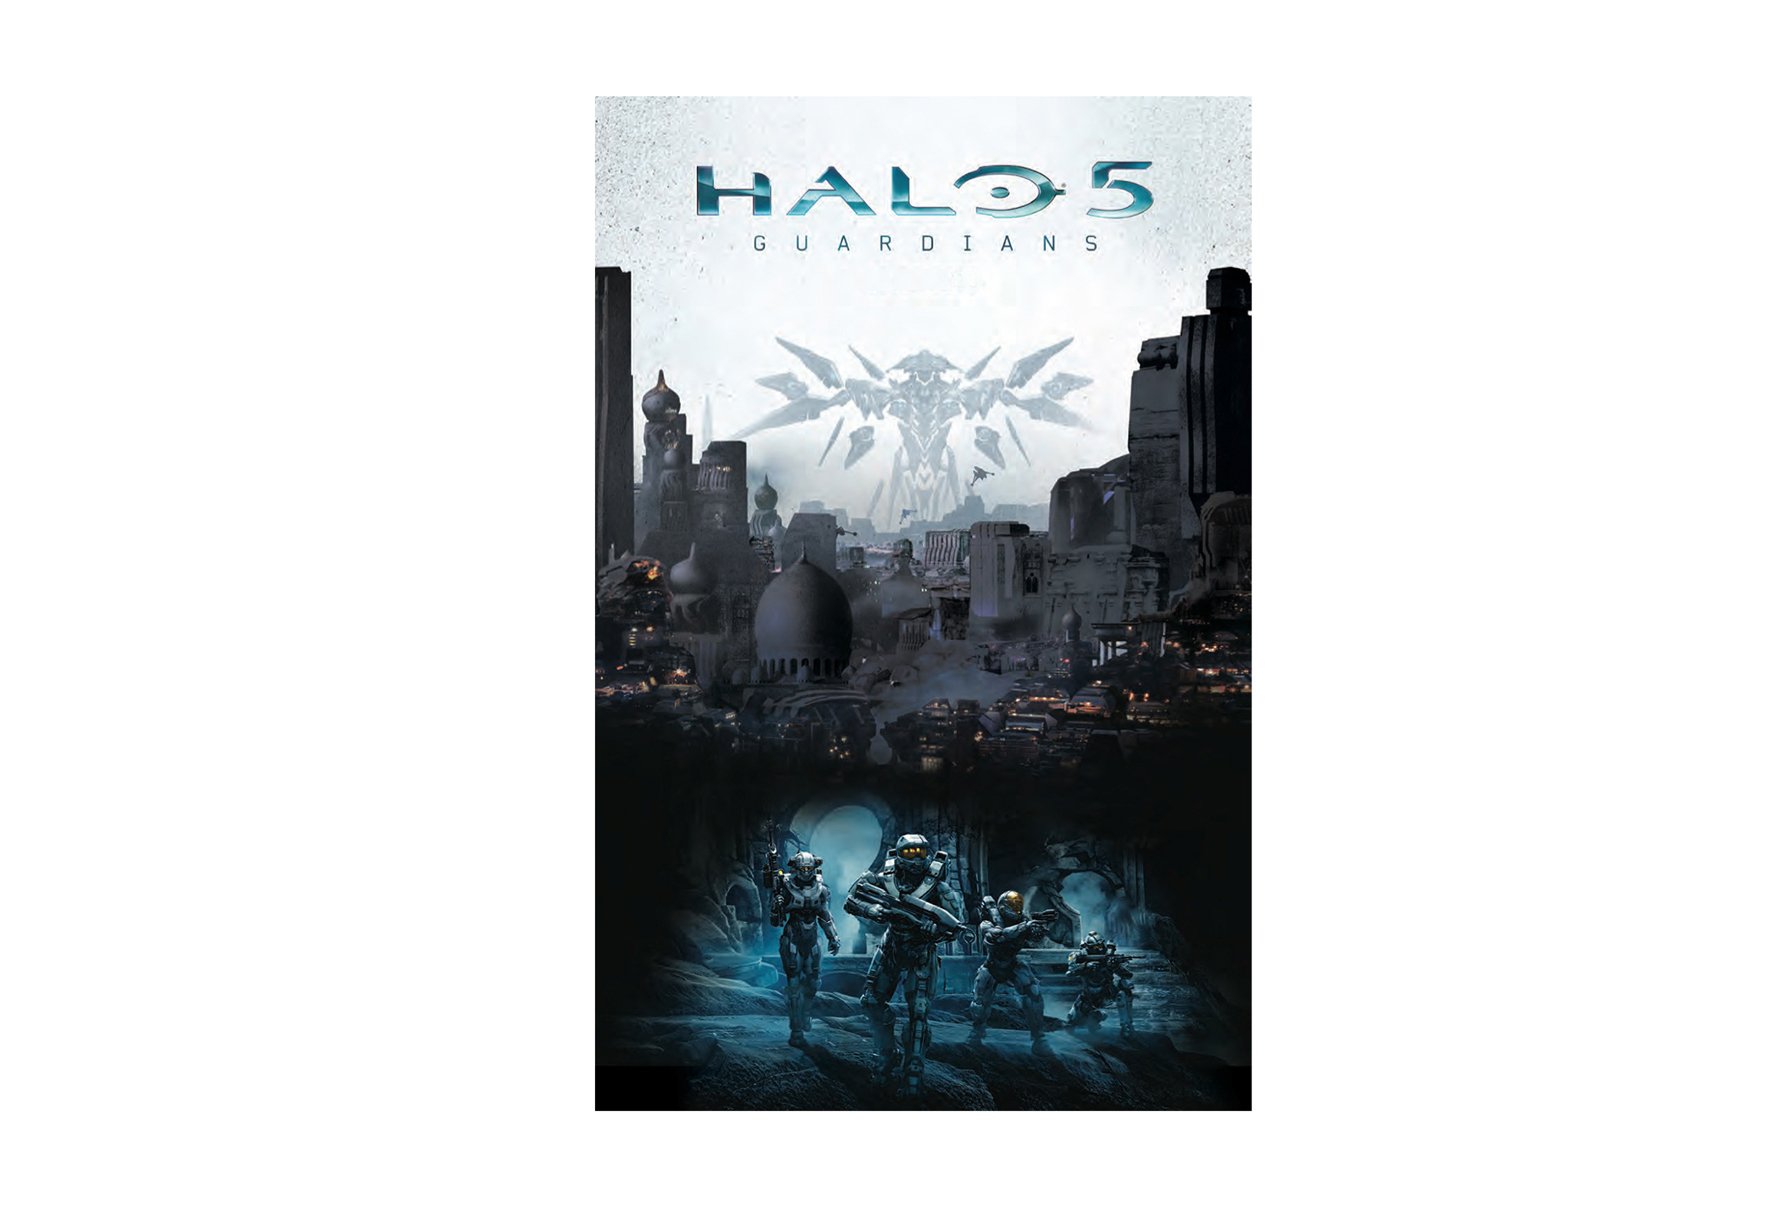 msft_halo_intro_store_poster1.jpg